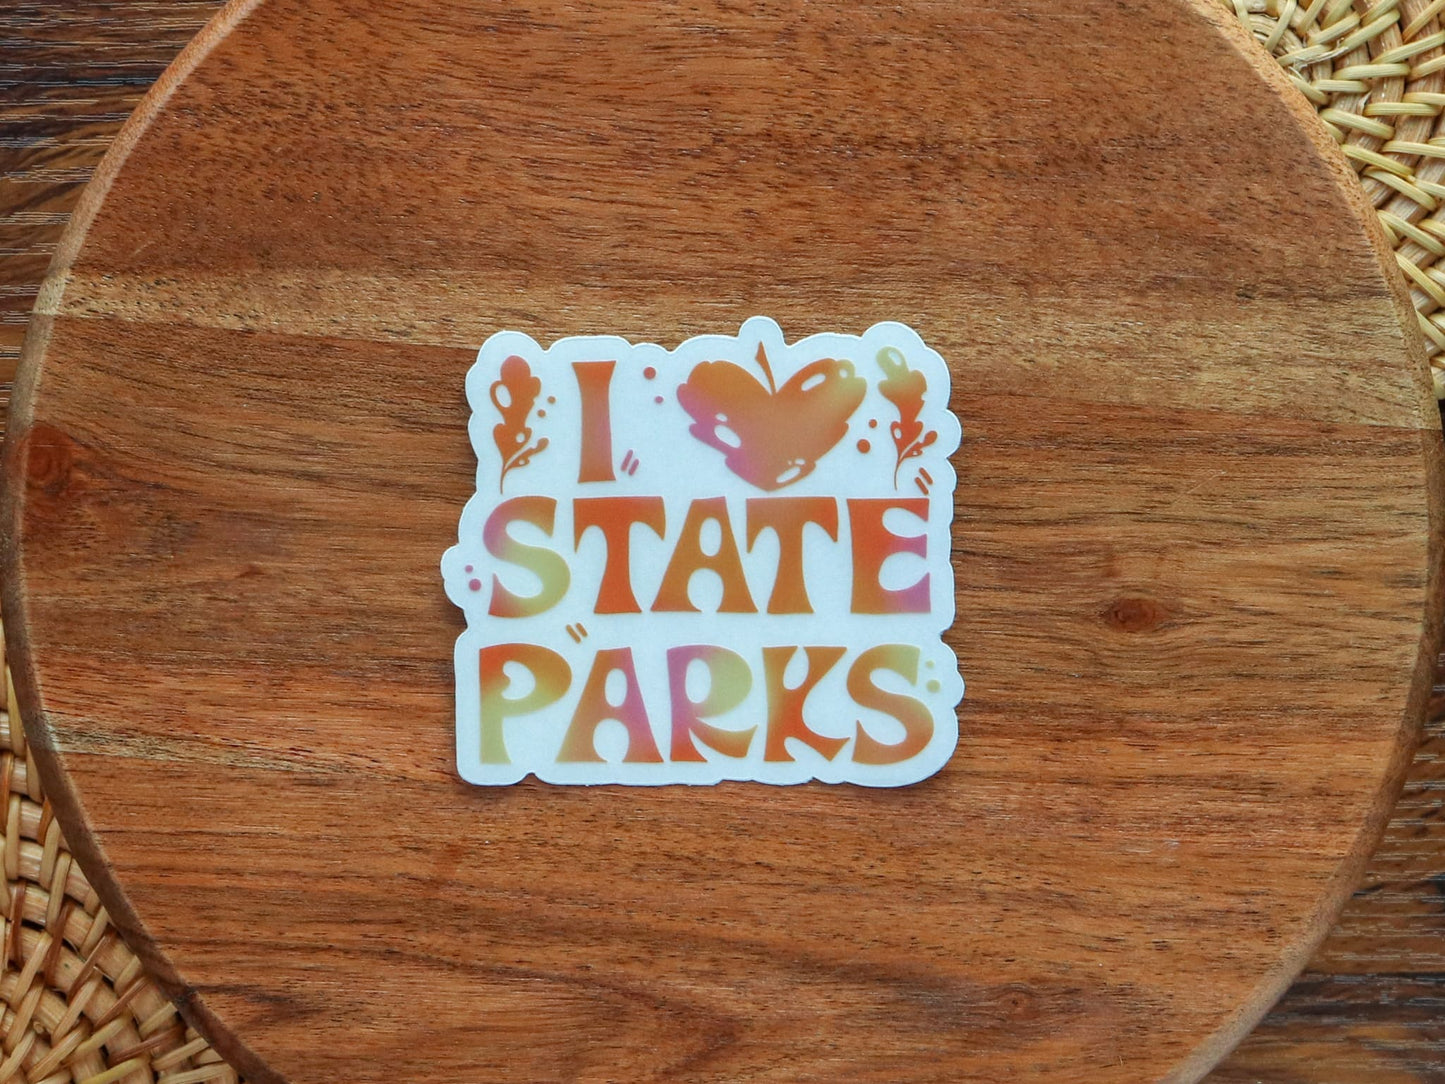 I Love State Parks clear sticker